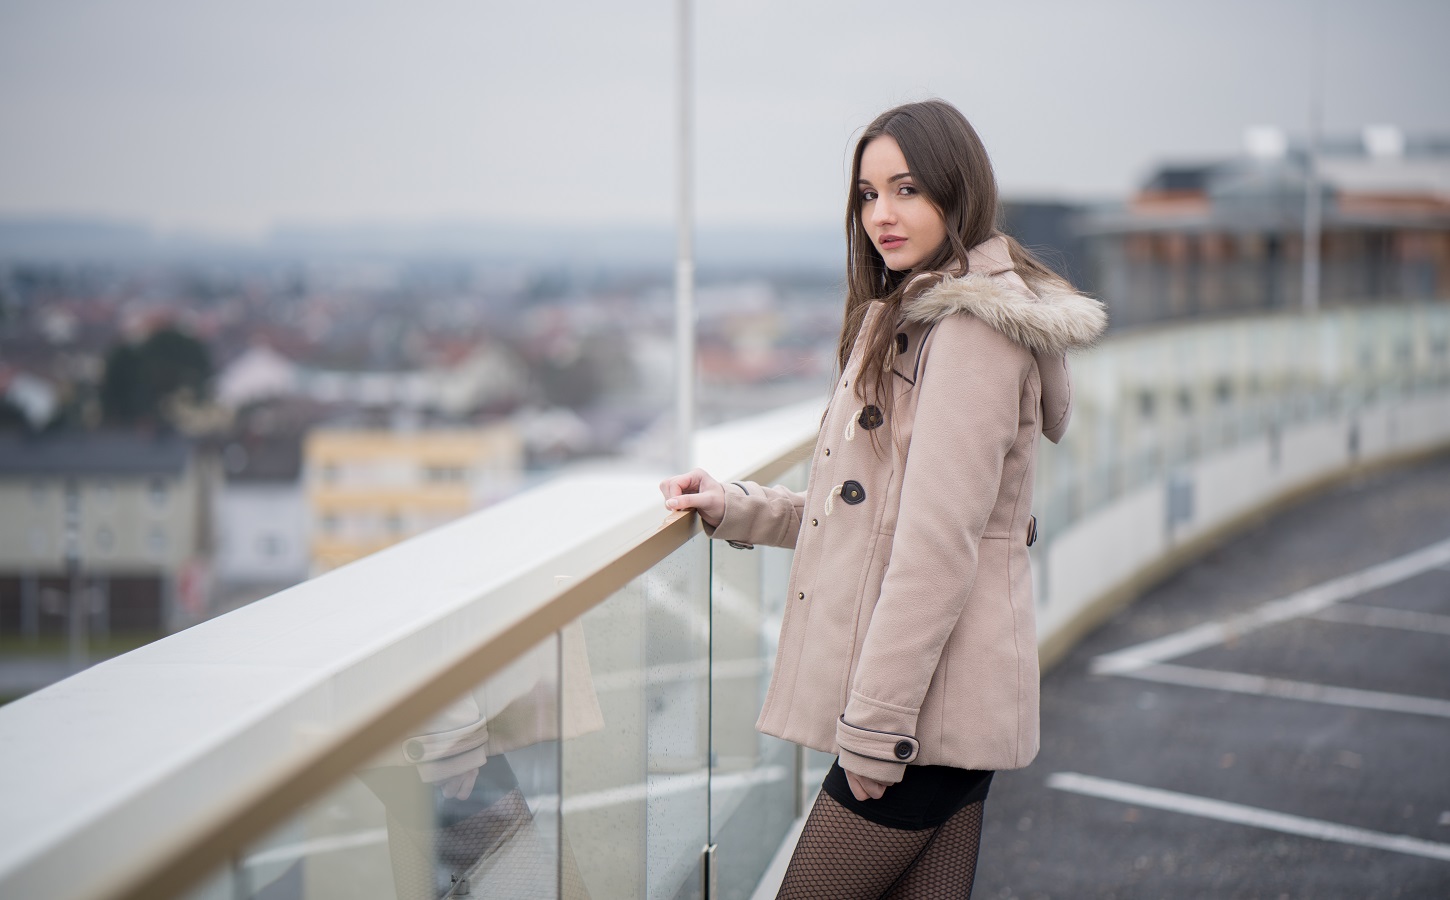 People 1450x900 women model brunette looking at viewer women outdoors jacket white jacket standing looking over shoulder long hair fishnet stockings urban classy Caucasian balcony pale makeup parted lips